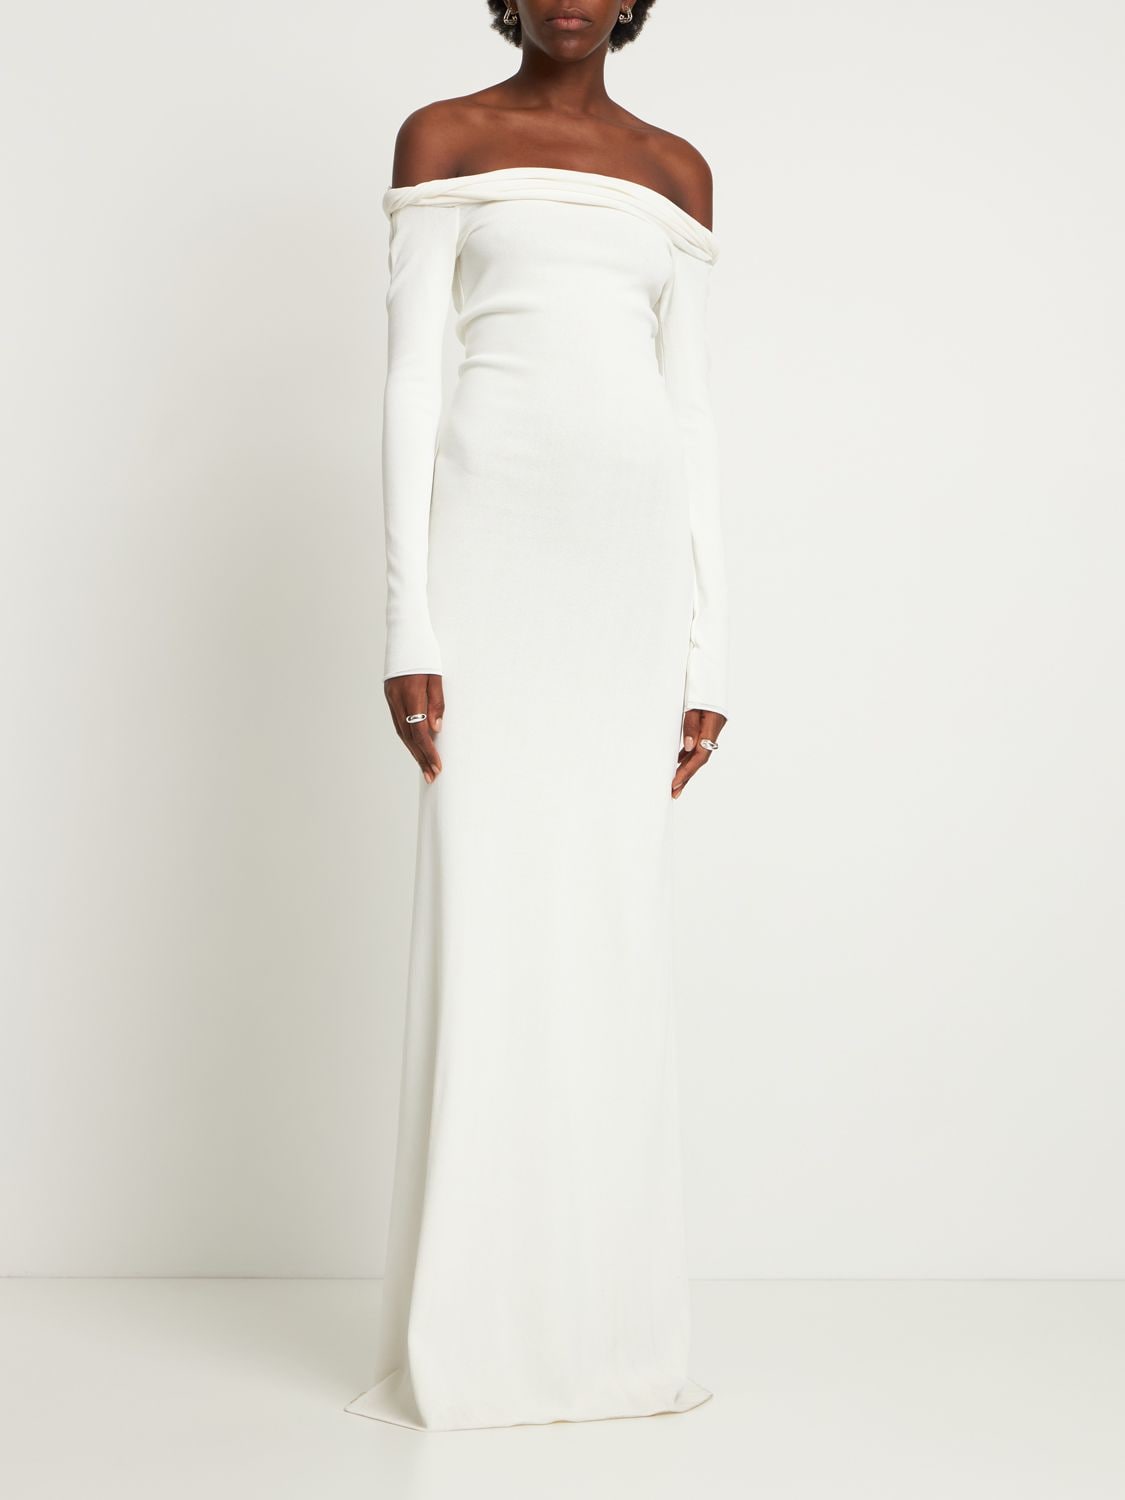 Blumarine Maxi Dress with High-Neck and Rear Cut-Out in Laminated Visc